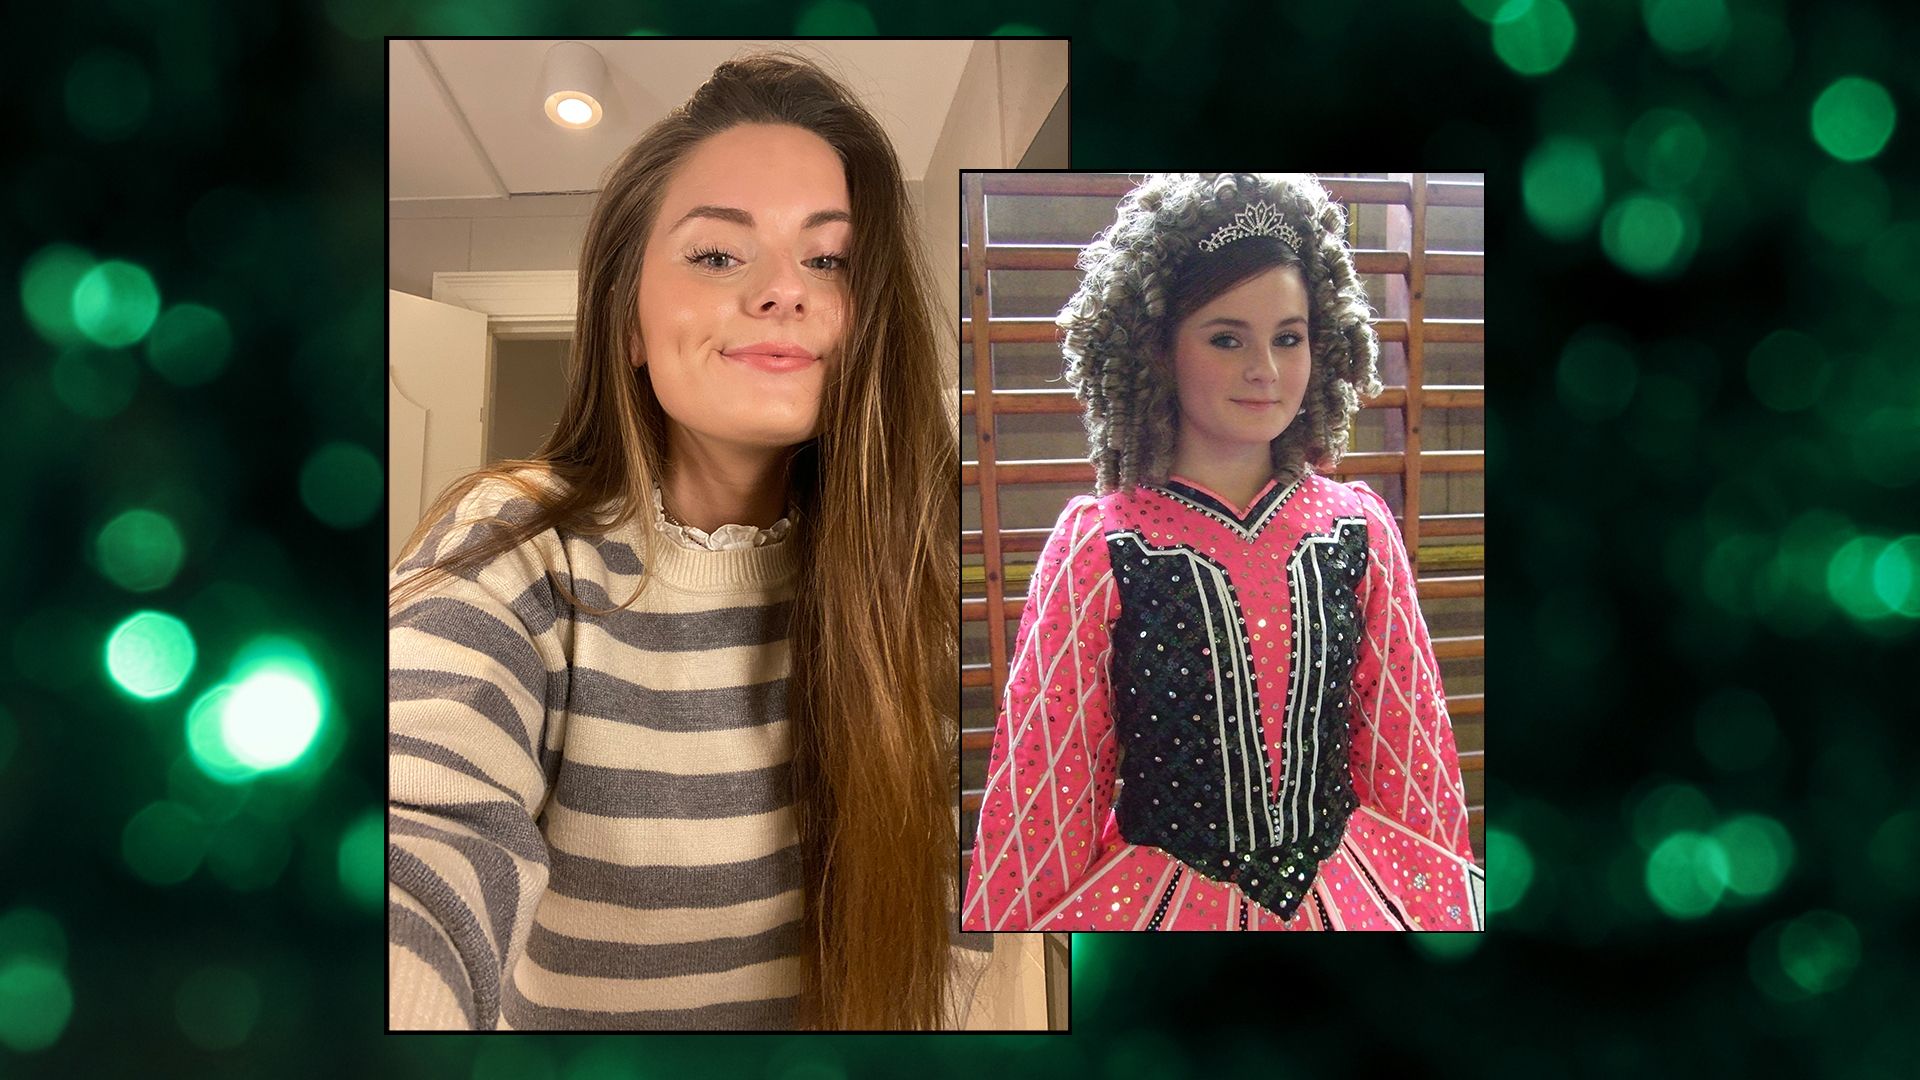 collage of woman and teen girl in Irish dancing clothes